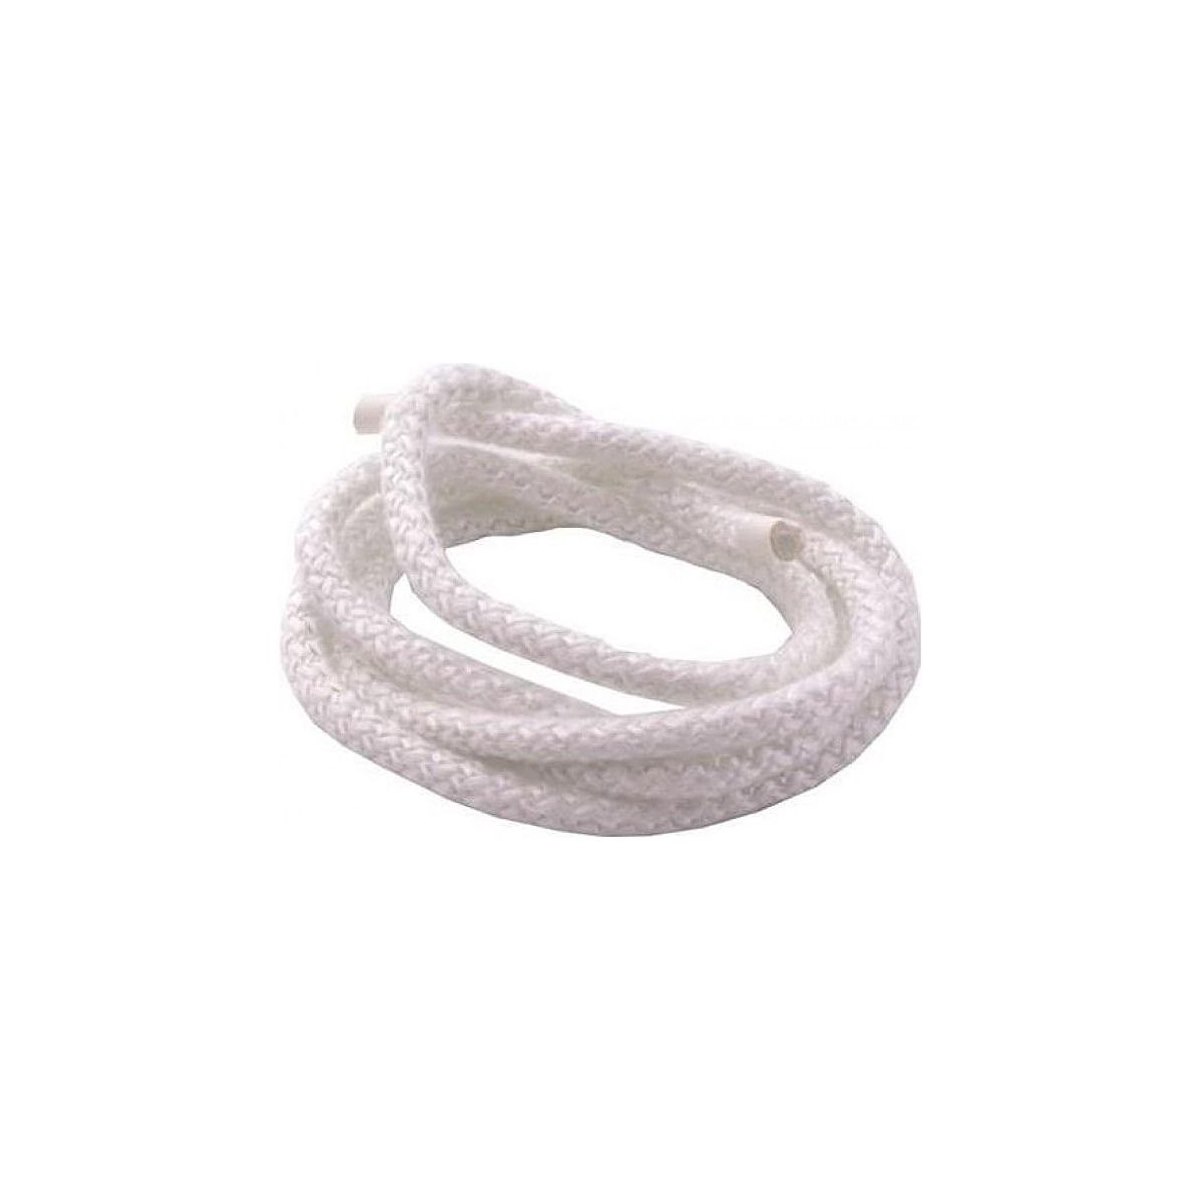 Where to Buy Stove Rope